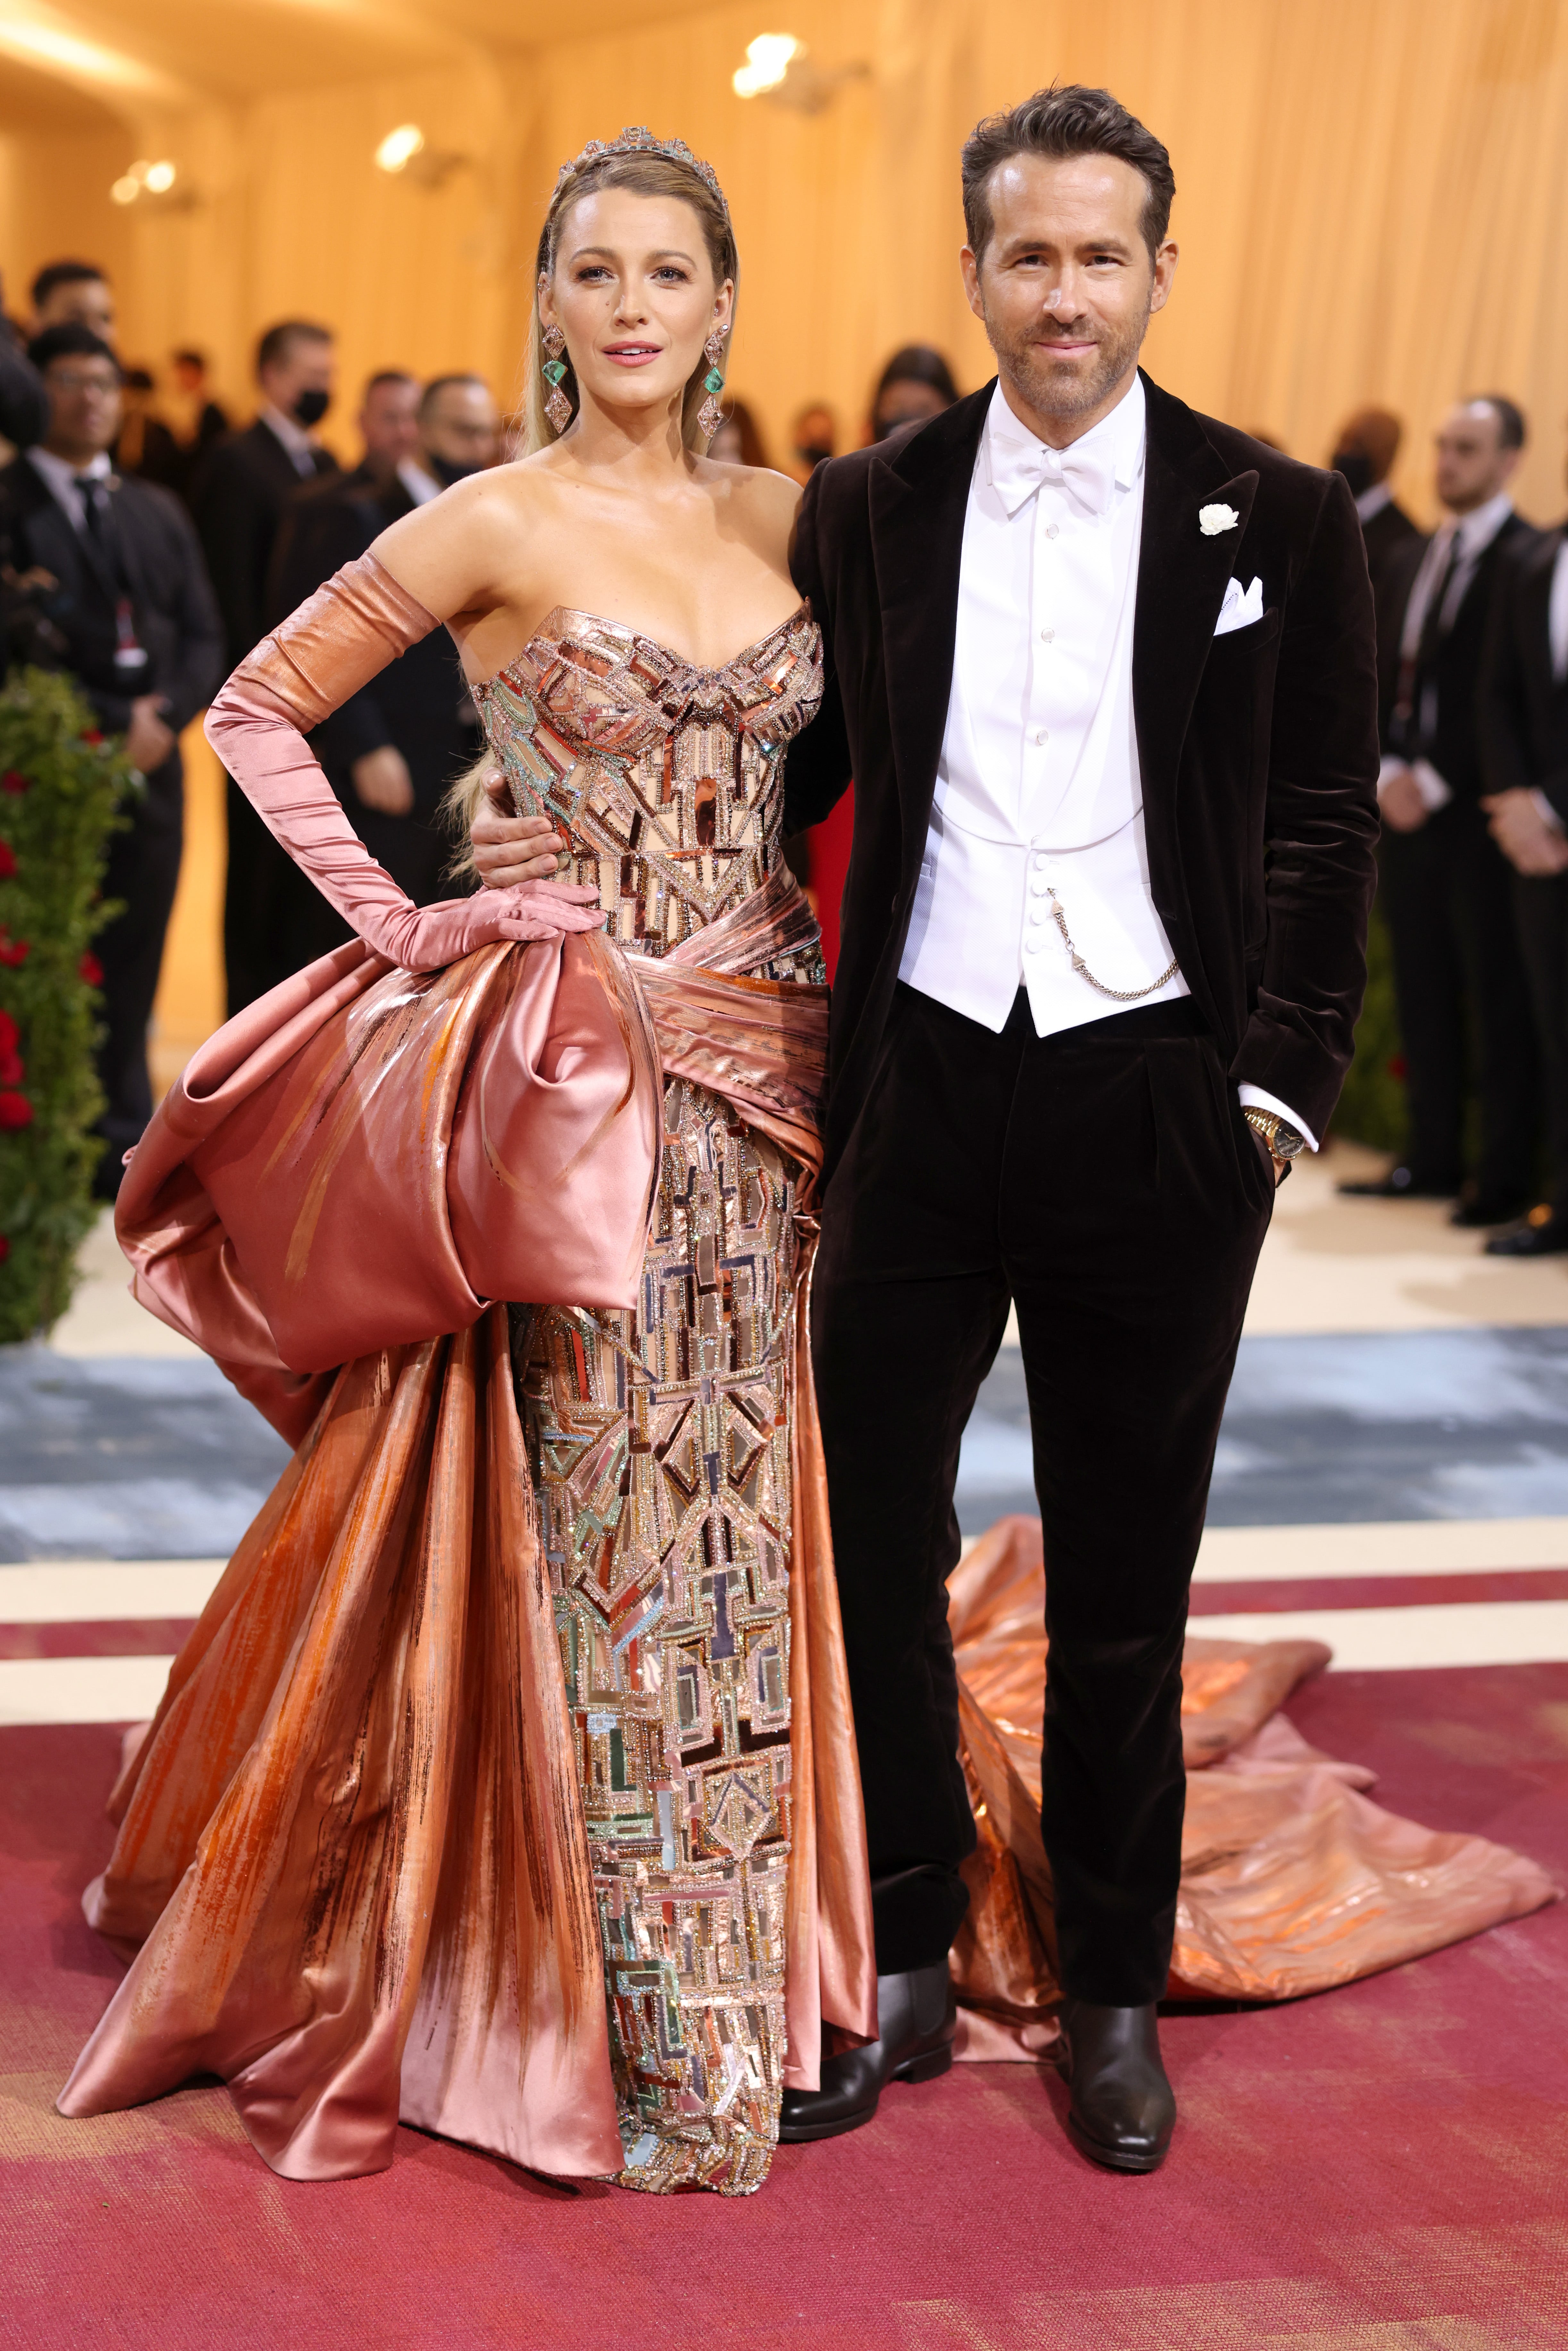 Celebrity Couples at the 2022 Met Gala: Red Carpet Photos